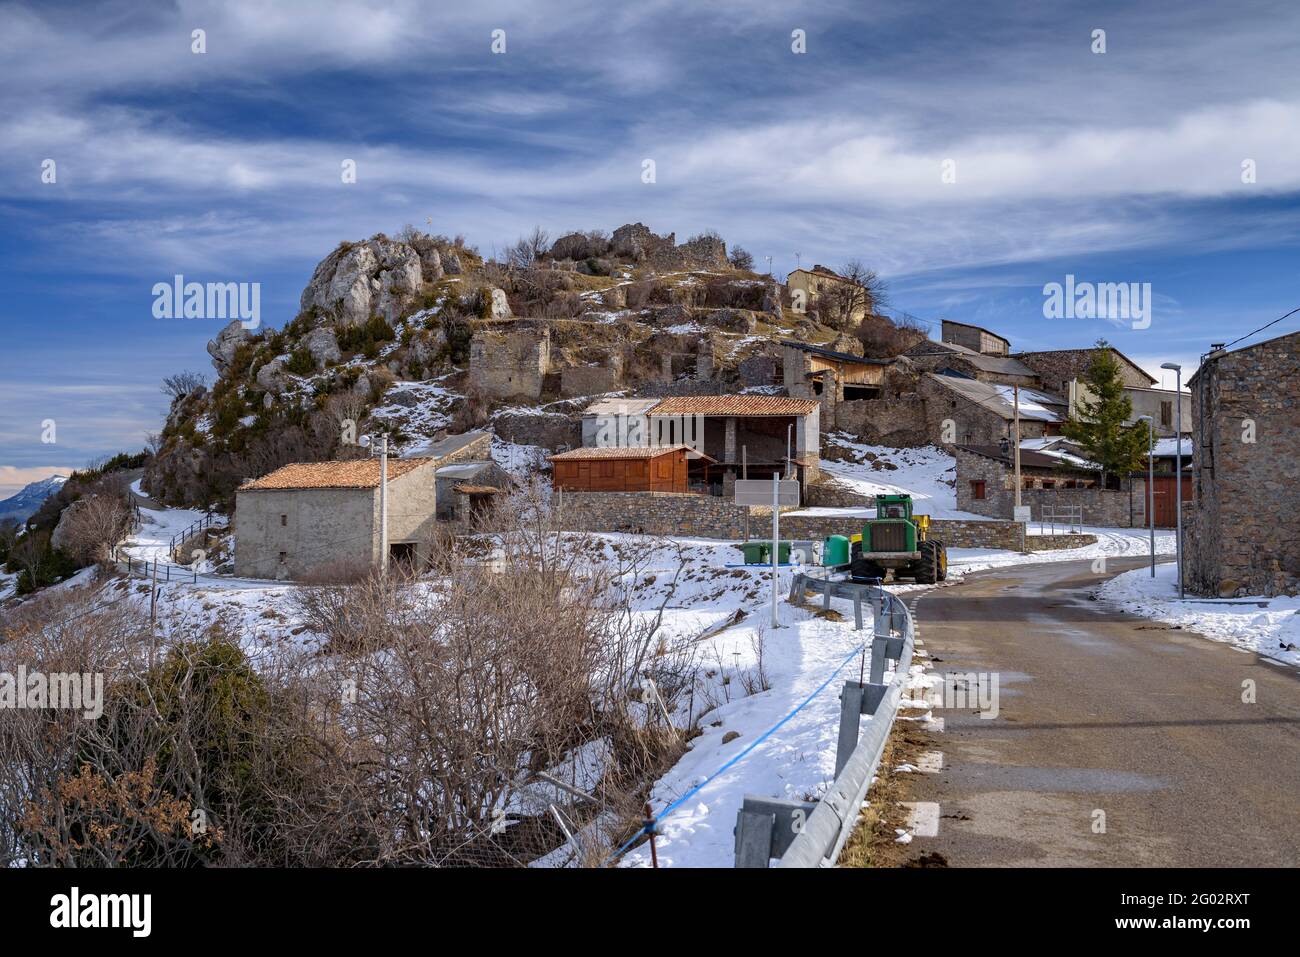 View of the snowy town of La Guàrdia d'Ares in winter, in the Aguilar valleys (Les Valls d'Aguilar, Alt Urgell, Catalonia, Spain, Pyrenees) Stock Photo